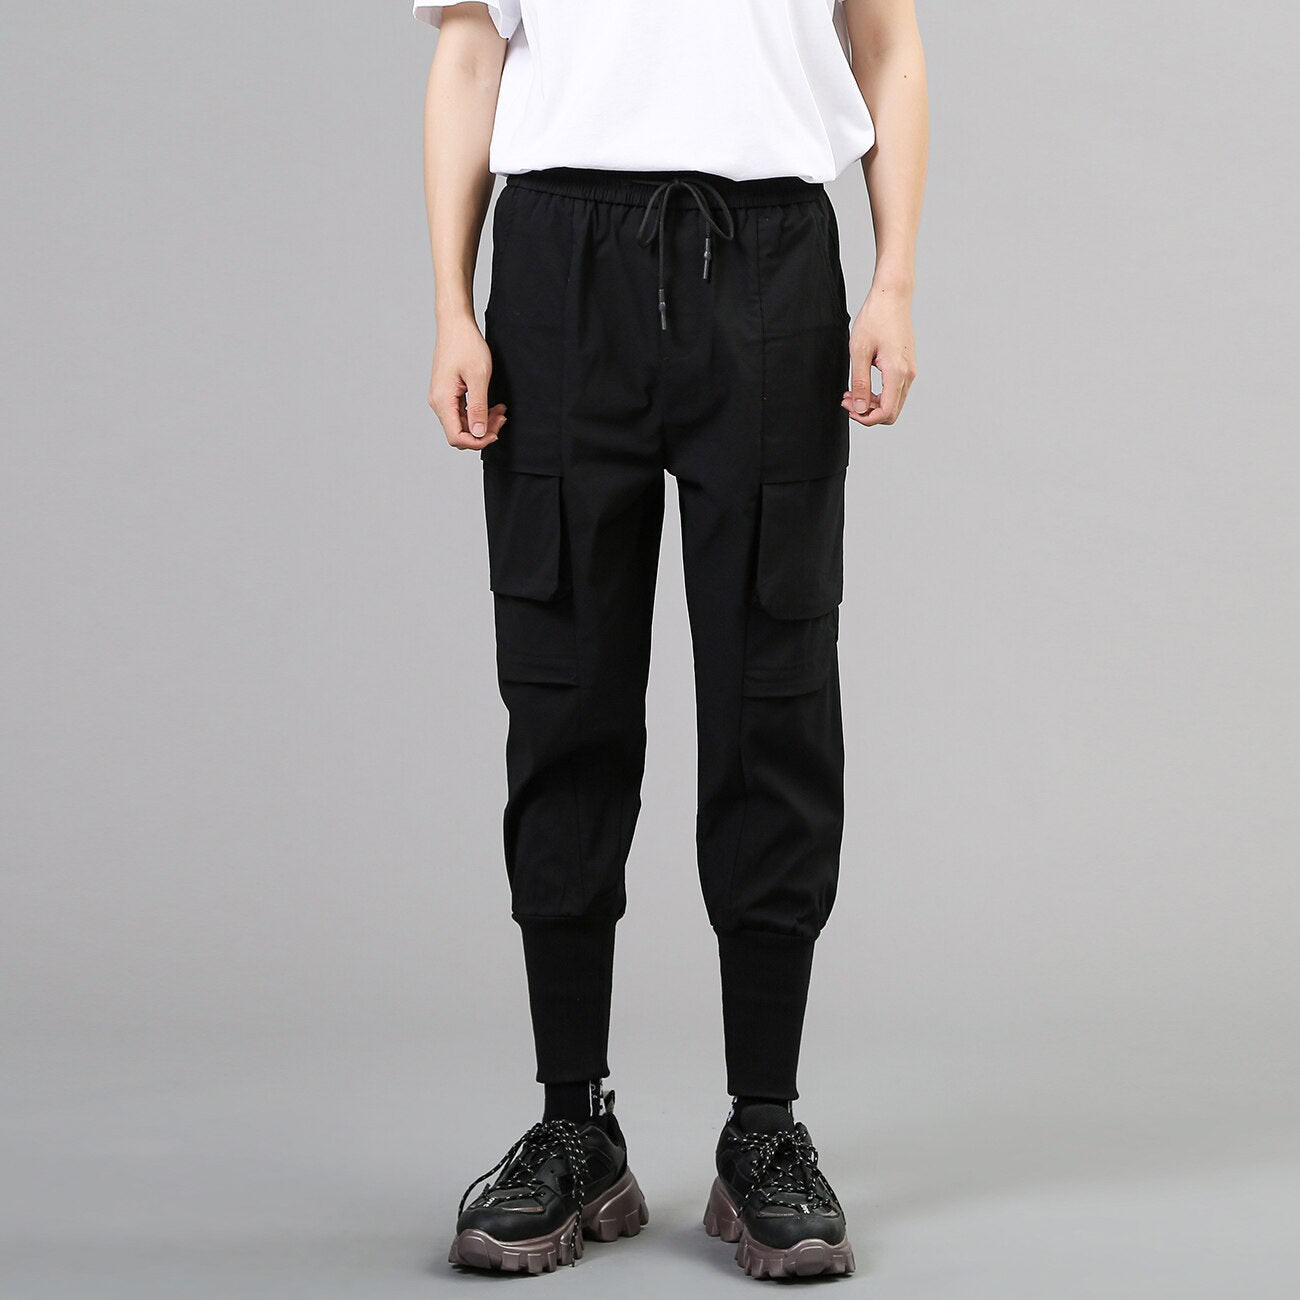 A Comprehensive Guide to Techwear Pants - Style Vanity